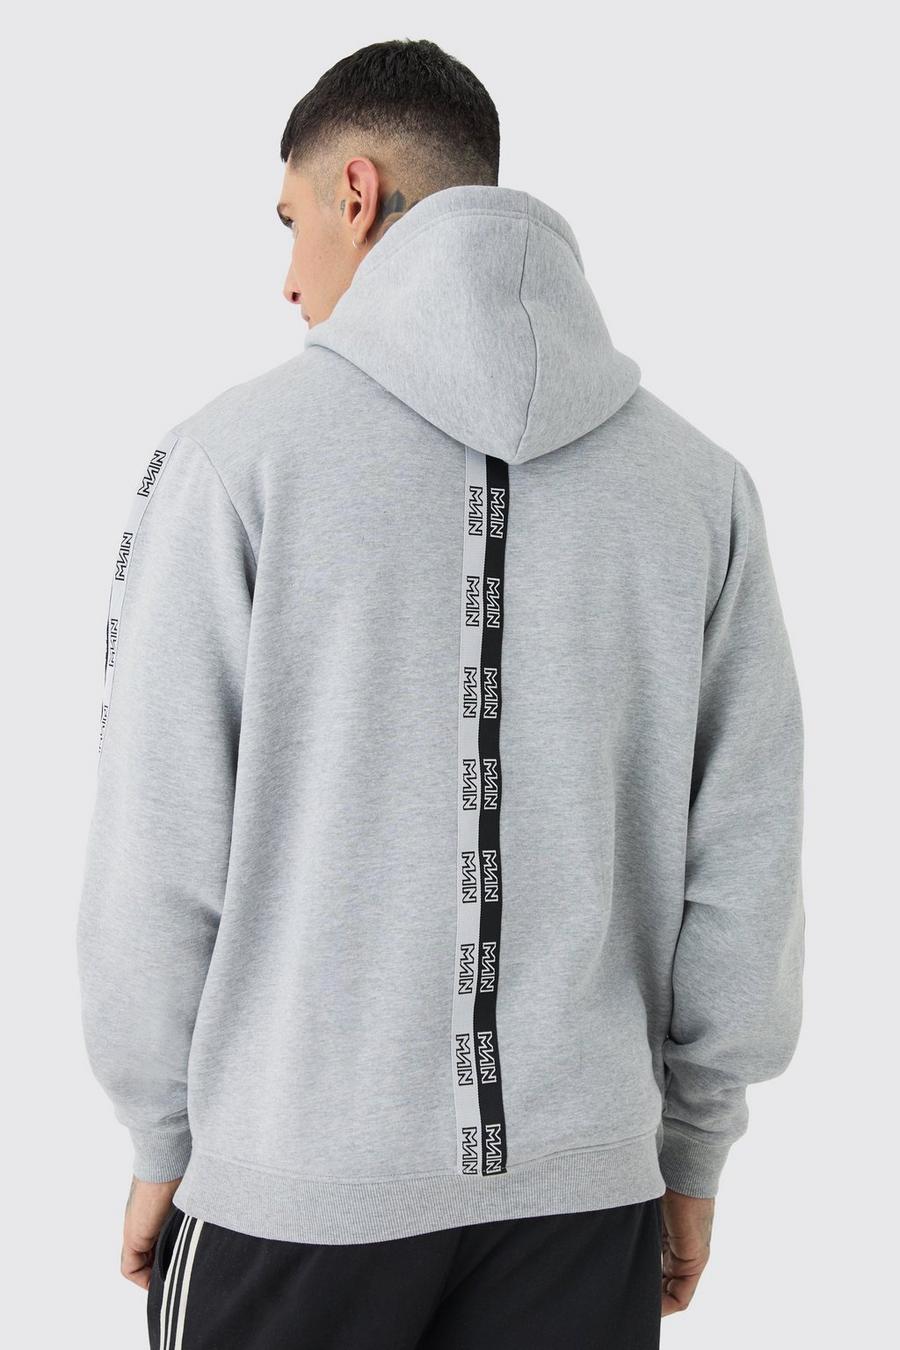 Tall Official Man Hoodie, Grey marl image number 1